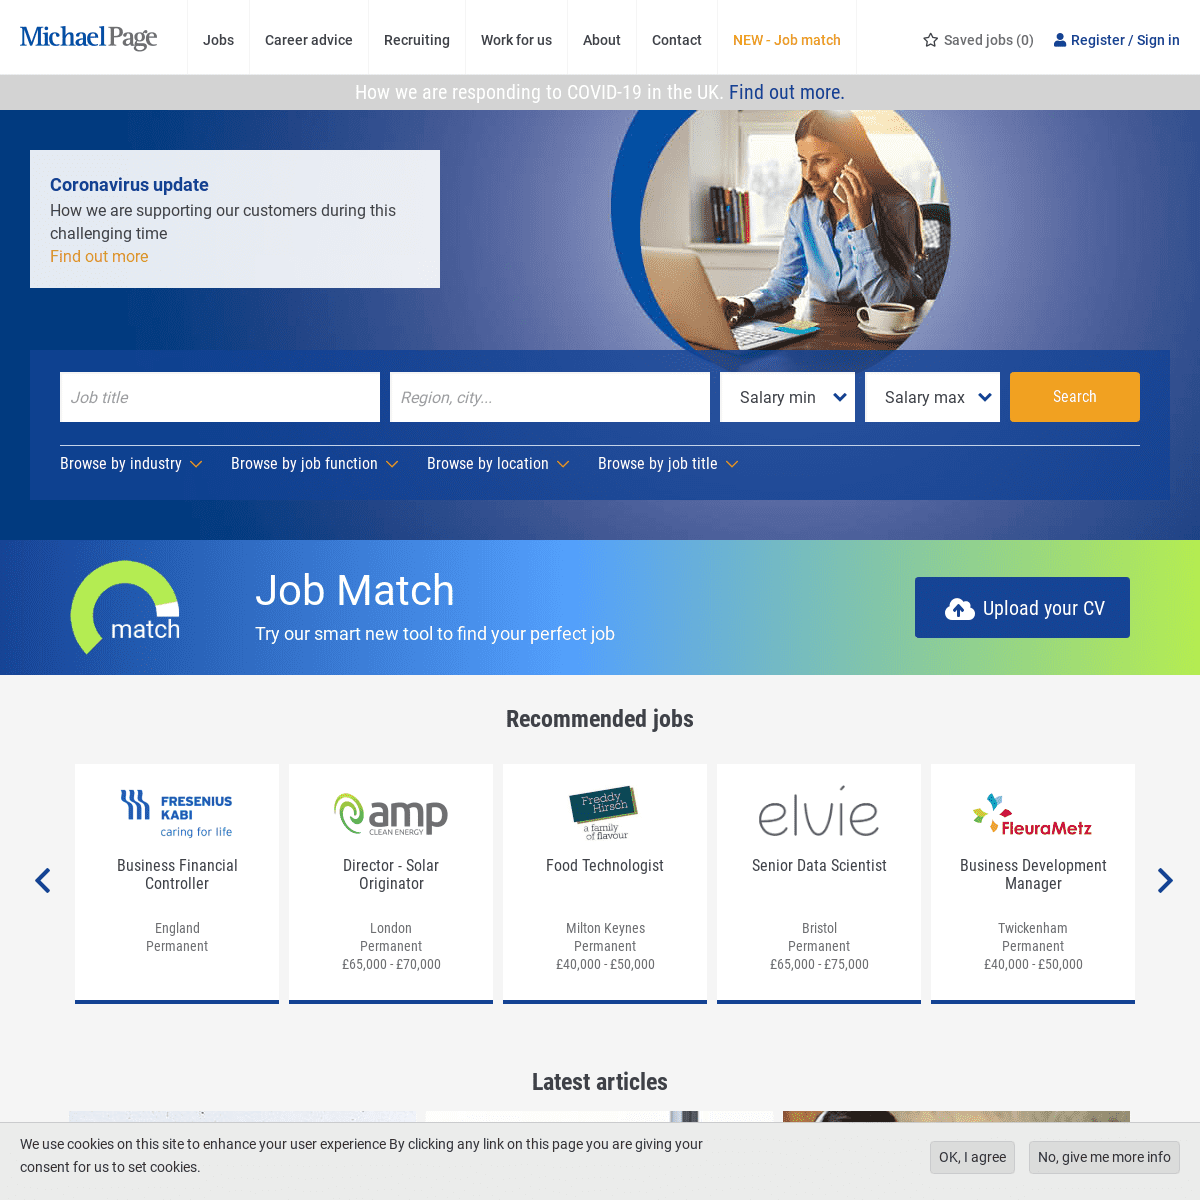 A complete backup of michaelpage.co.uk